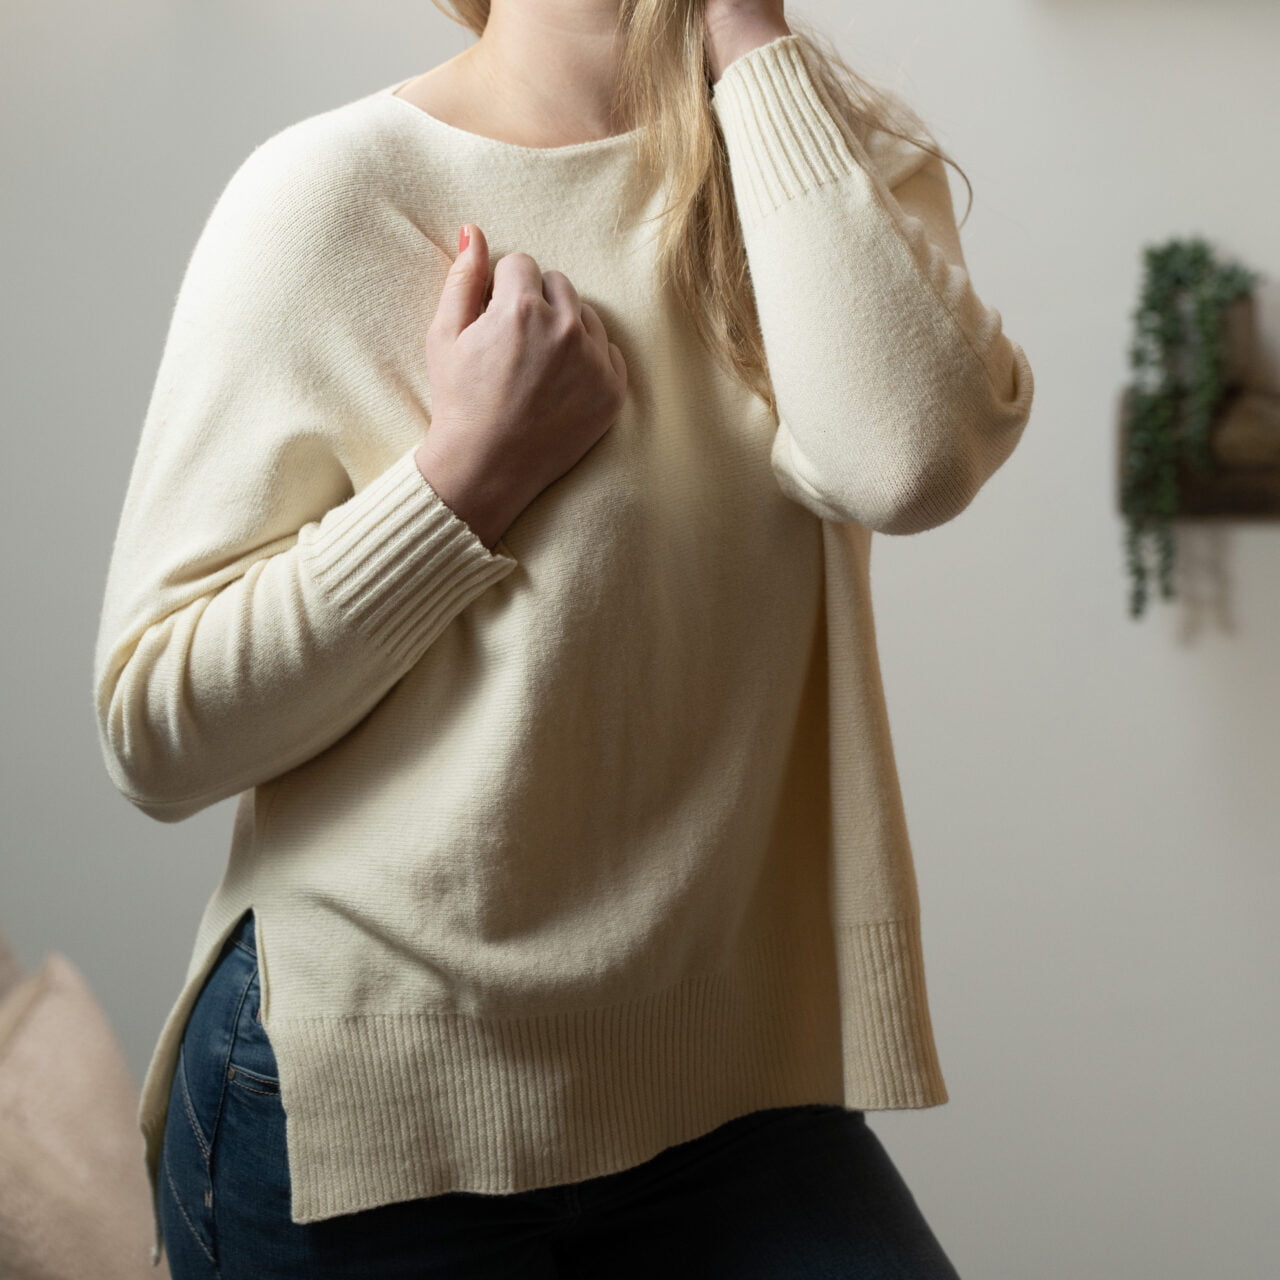 Fabulous Gifts Womens Accessories Spring Jumper Cream Long Sleeve by Weirs of Baggot Street